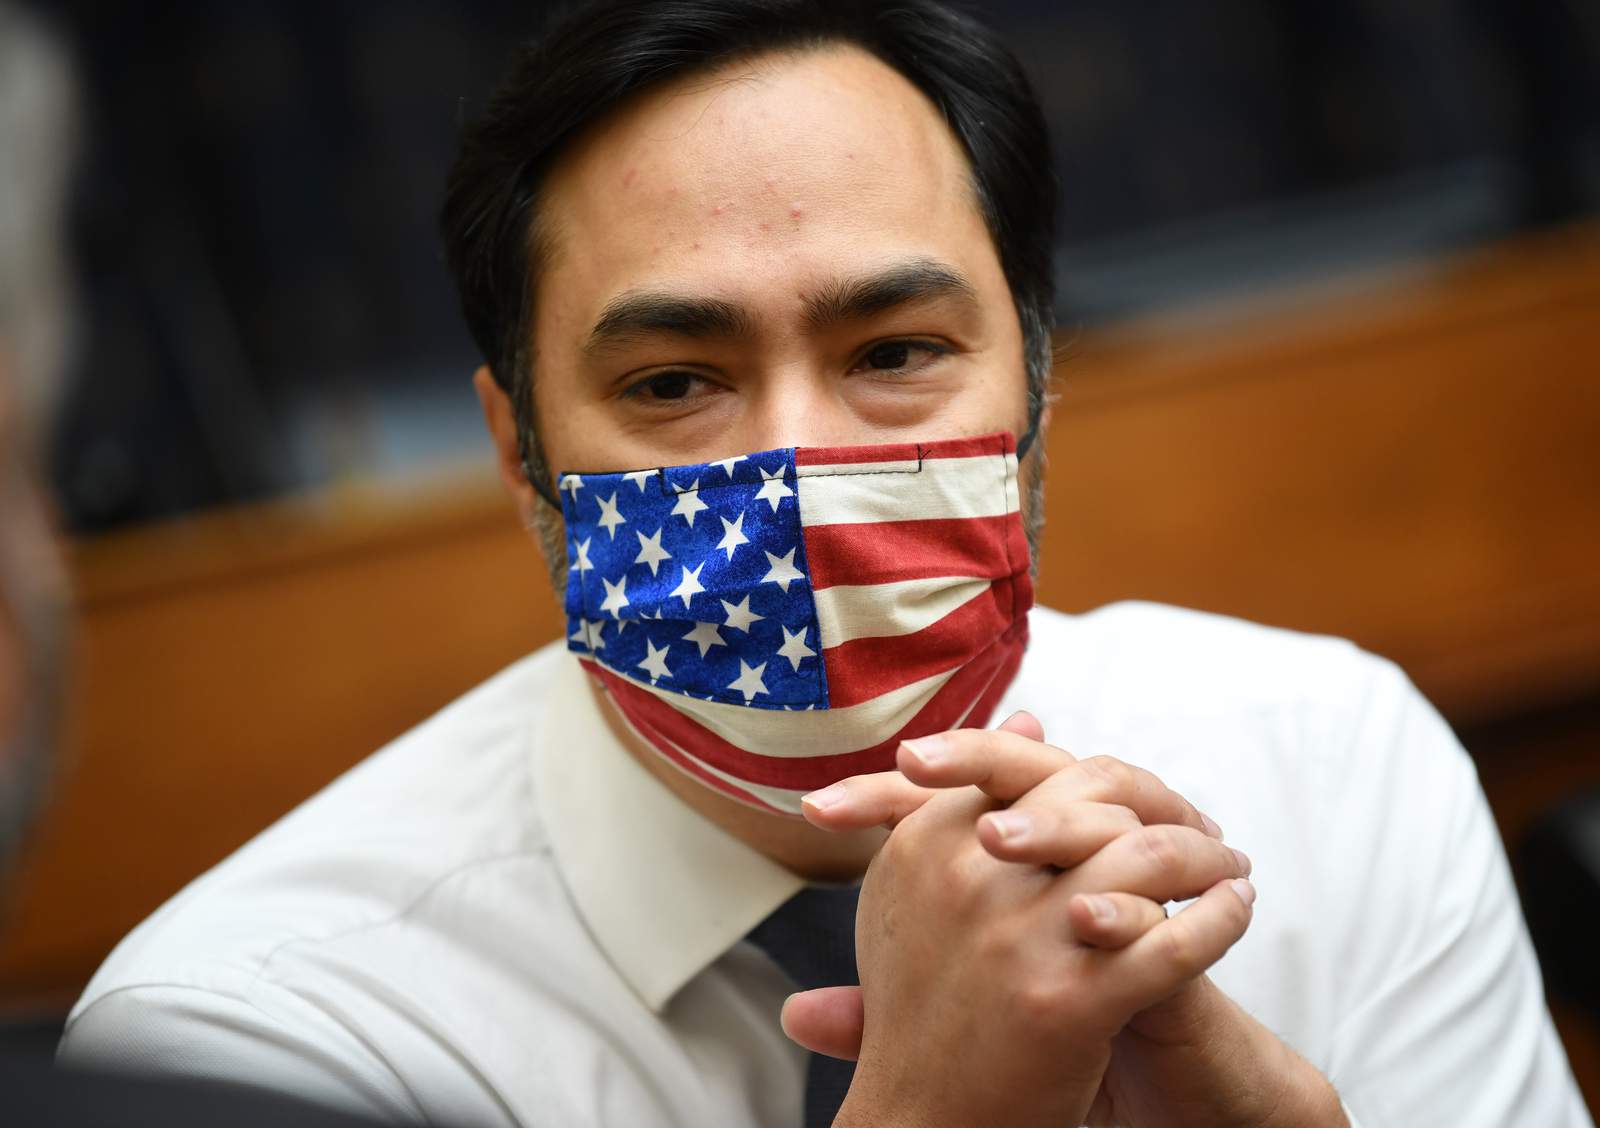 Joaquin Castro calls Trump ‘the most dangerous man to ever occupy the Oval Office’ during impeachment proceedings